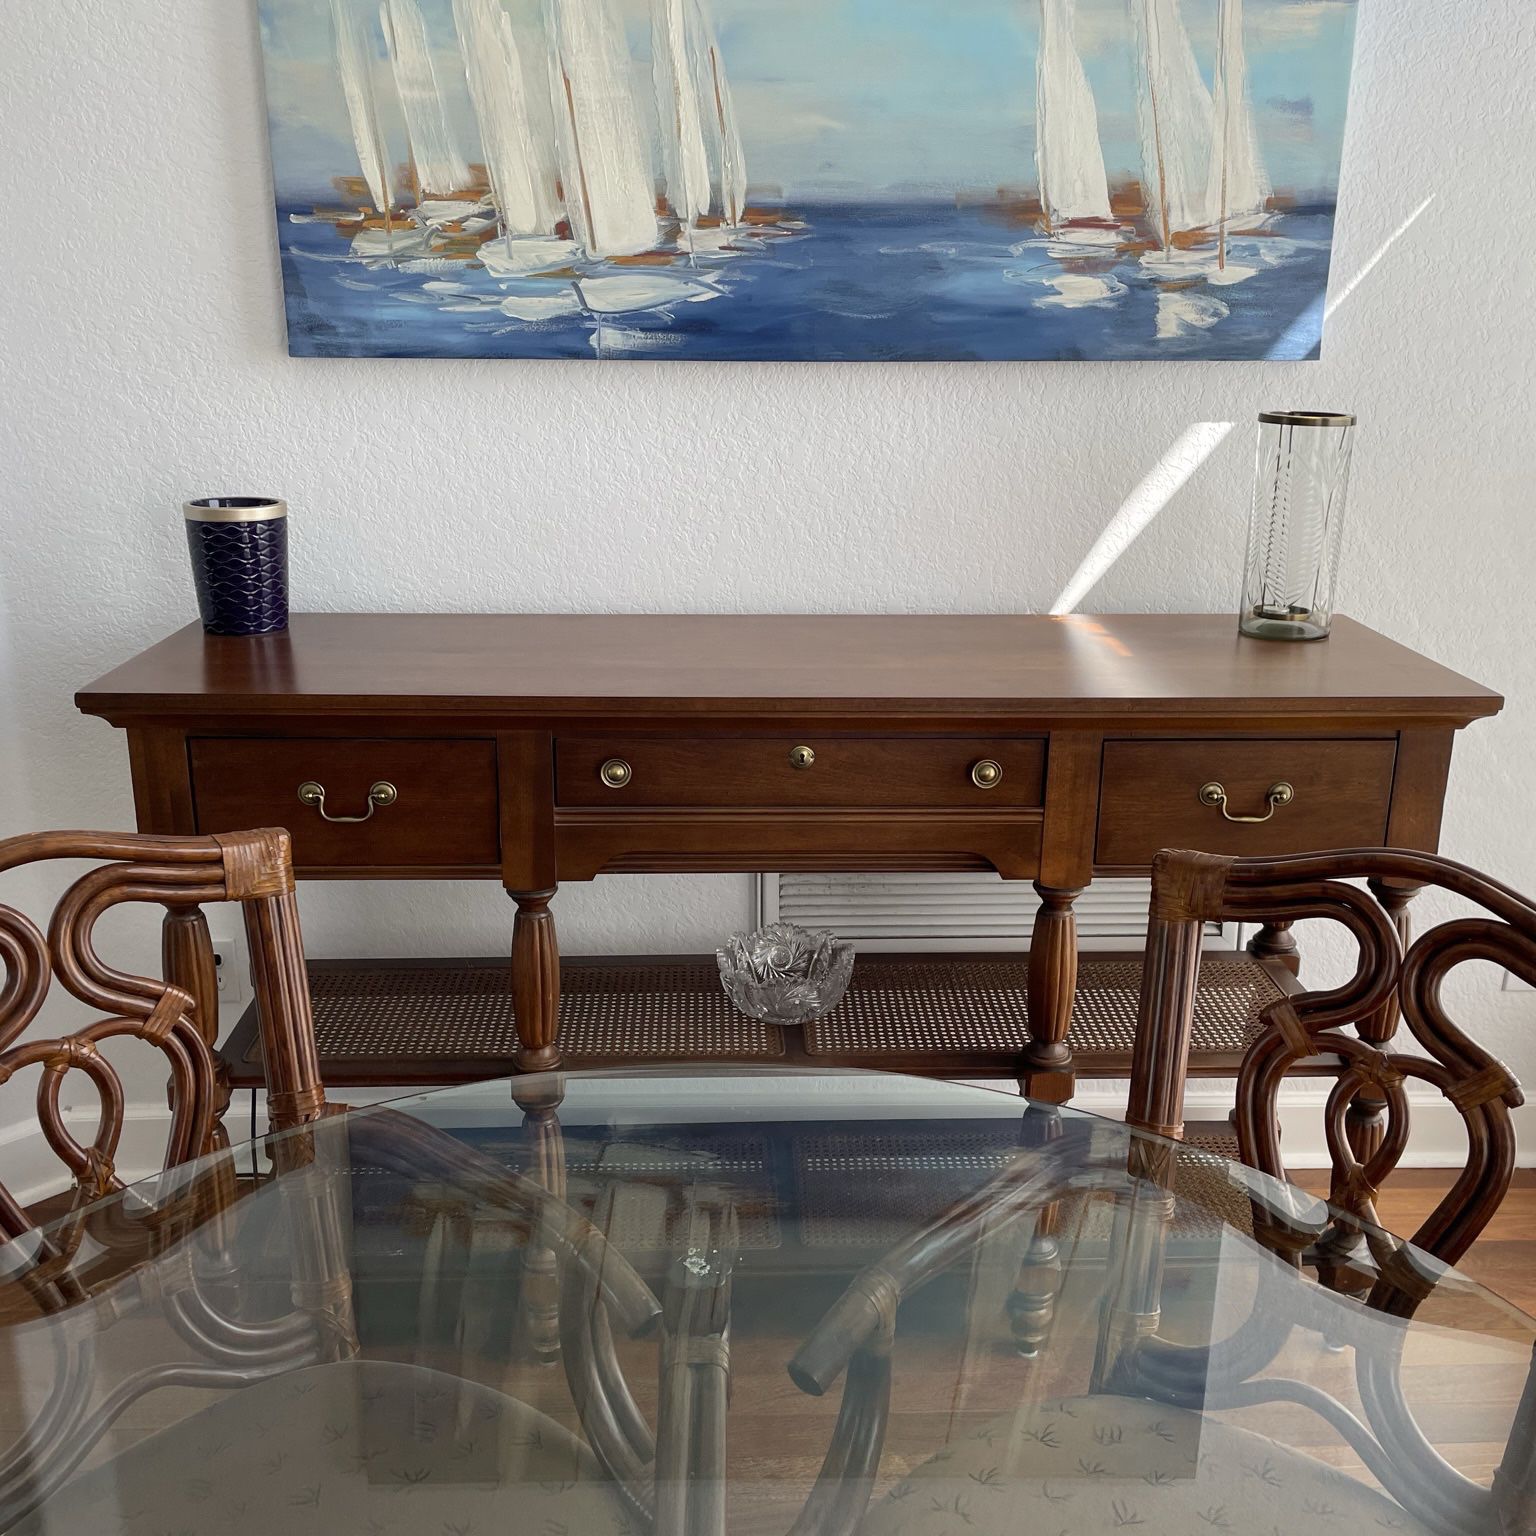 Broyhill Dining Table,chairs and Sideboard